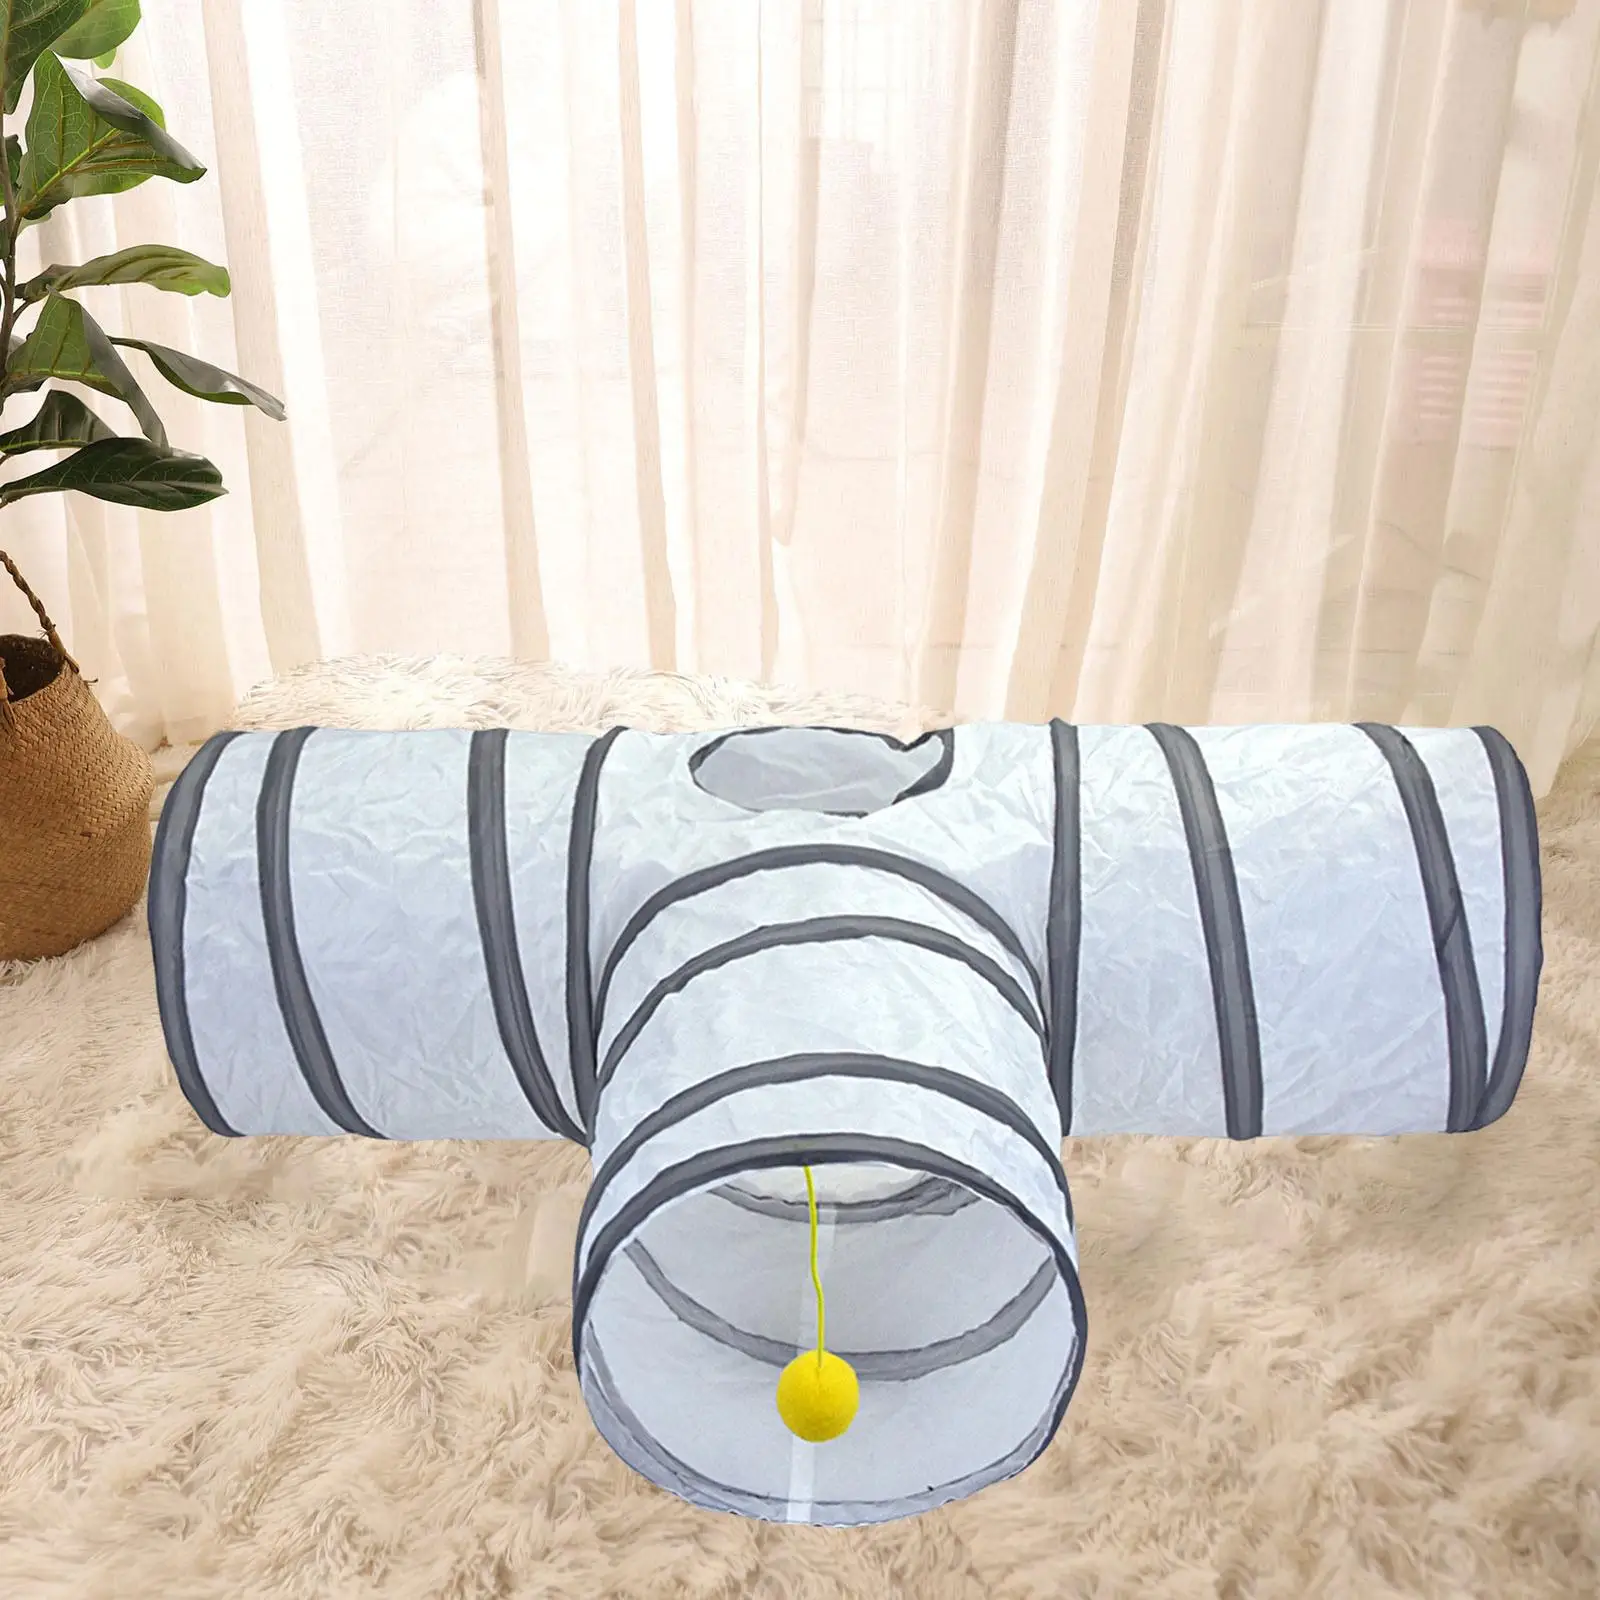 Collapsible Cat Tunnel Tube T Shape Agility Play Durable Scratch Resistant Kitty Toys for Rabbit Bunny Cats Ferrets Training